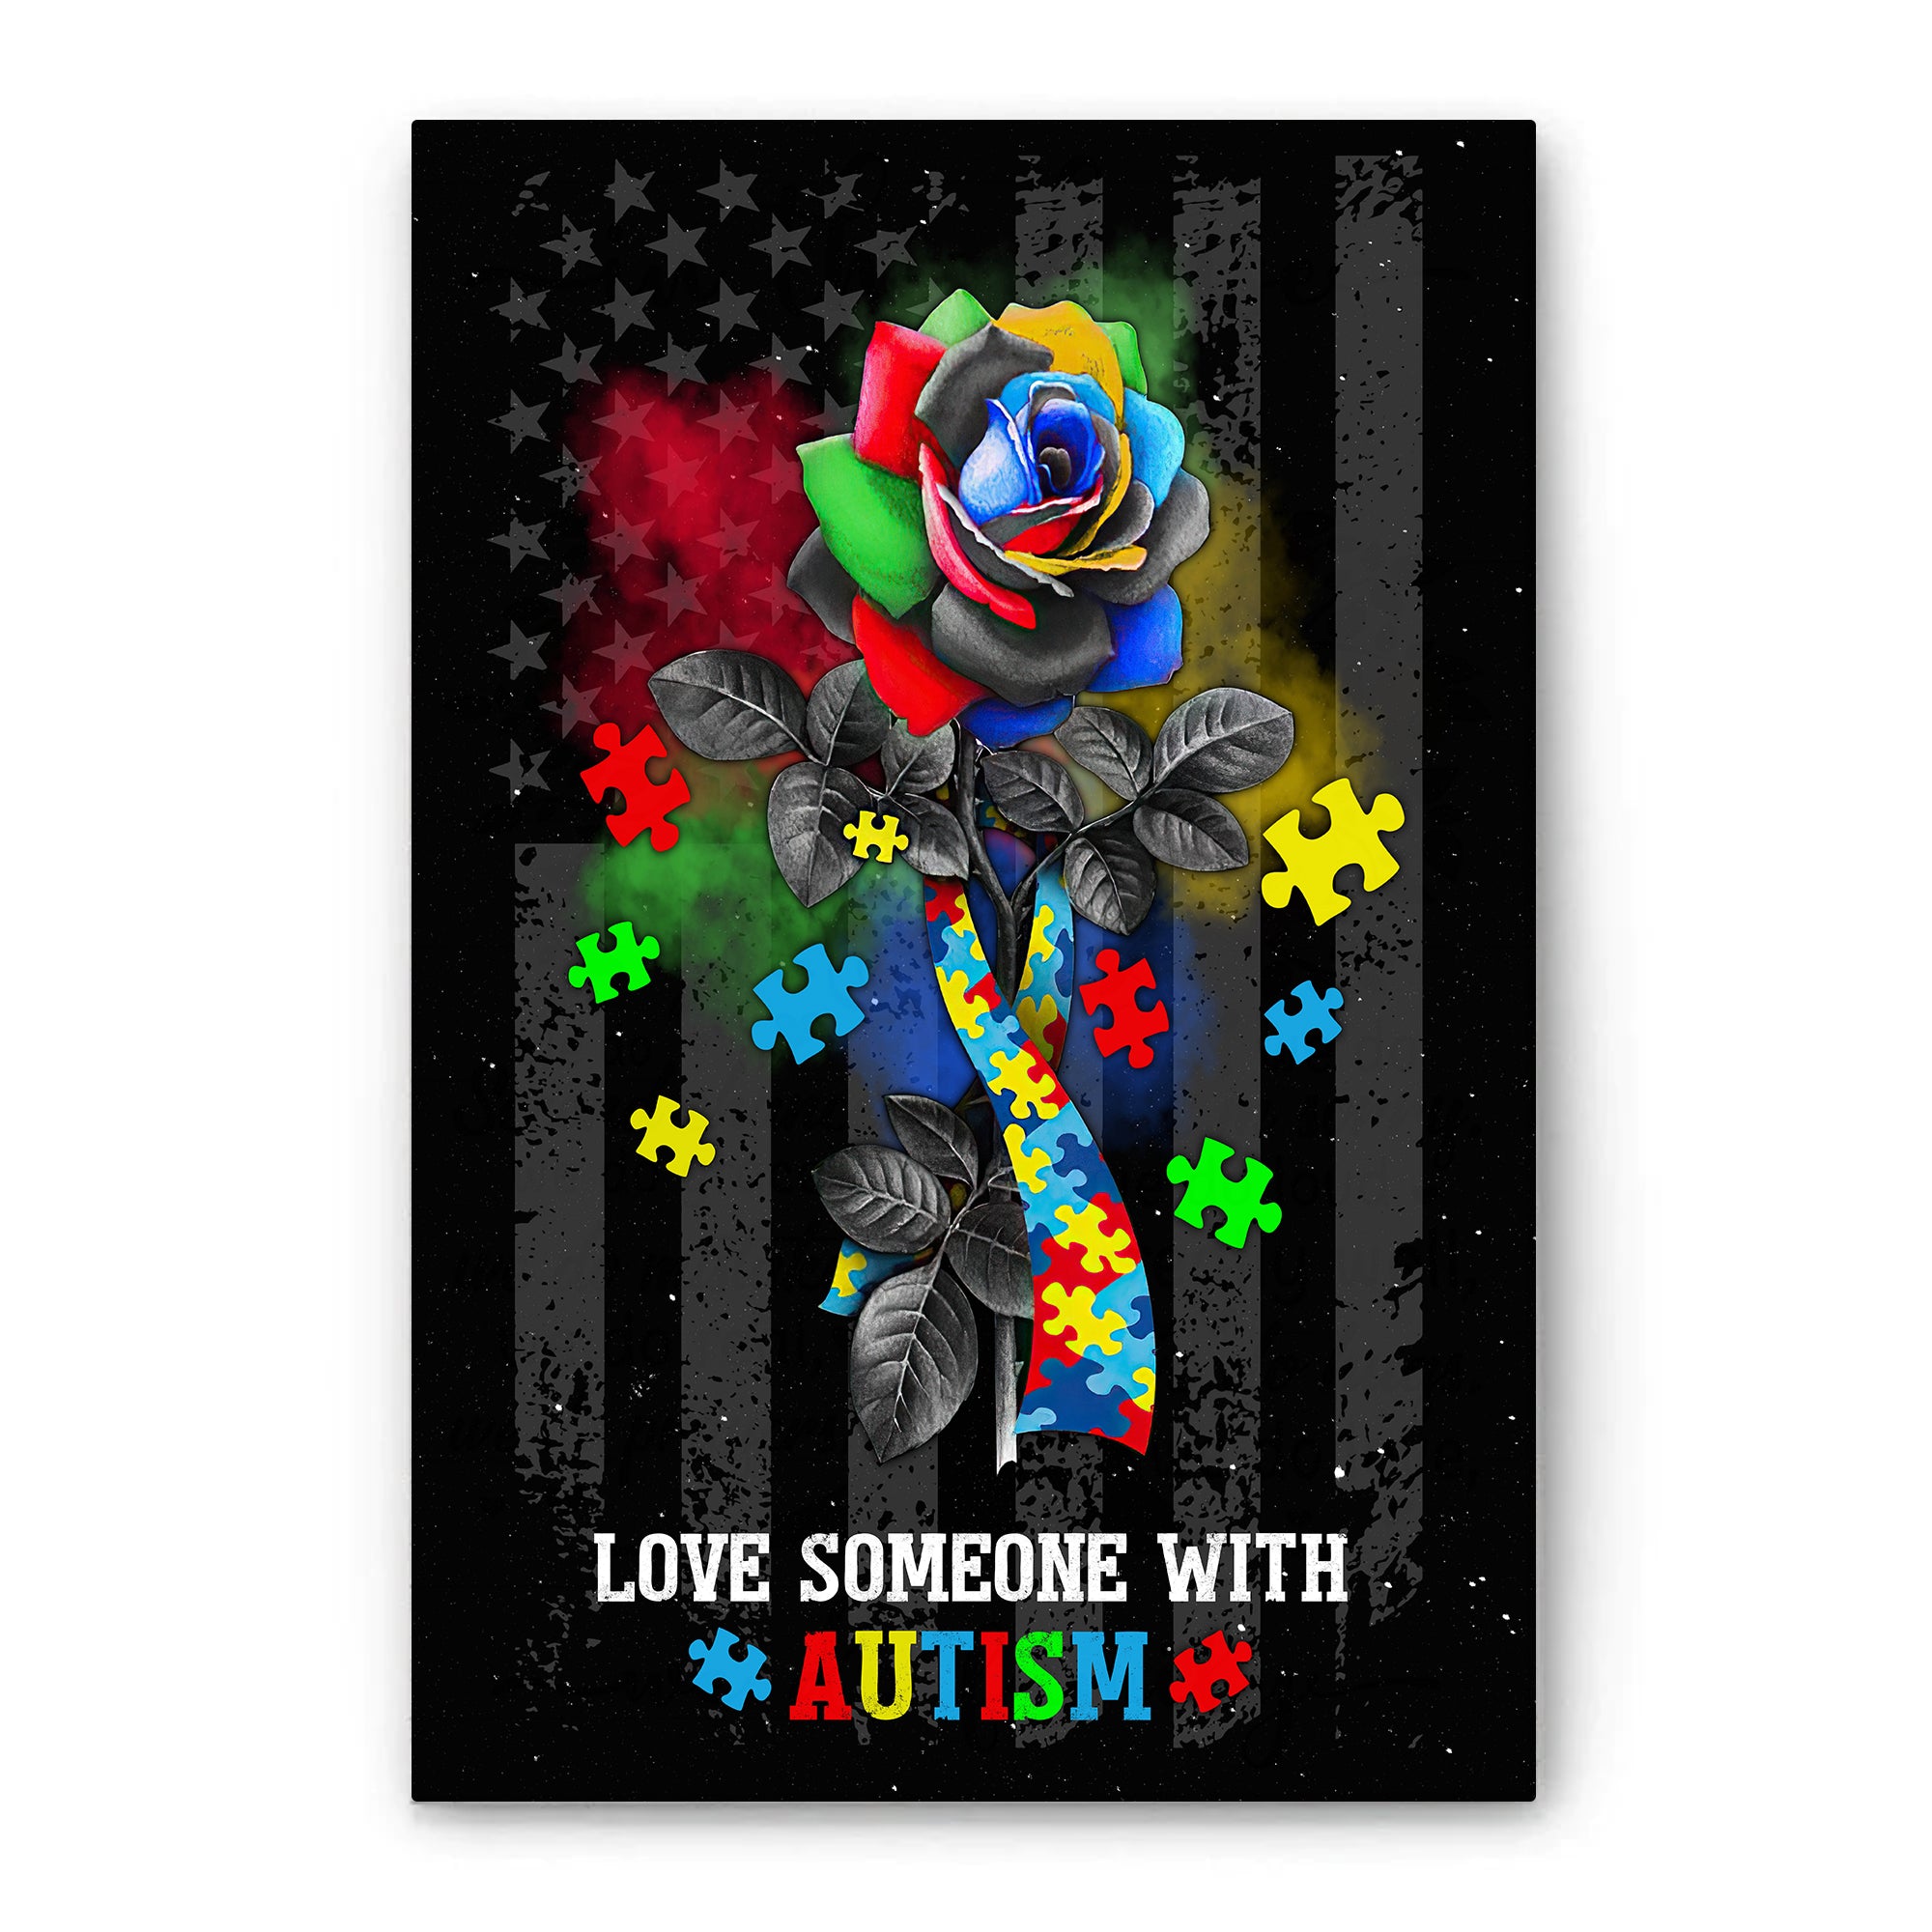 Autism Poster & Canvas, Love Someone With Autism Wall Art, Home Decor